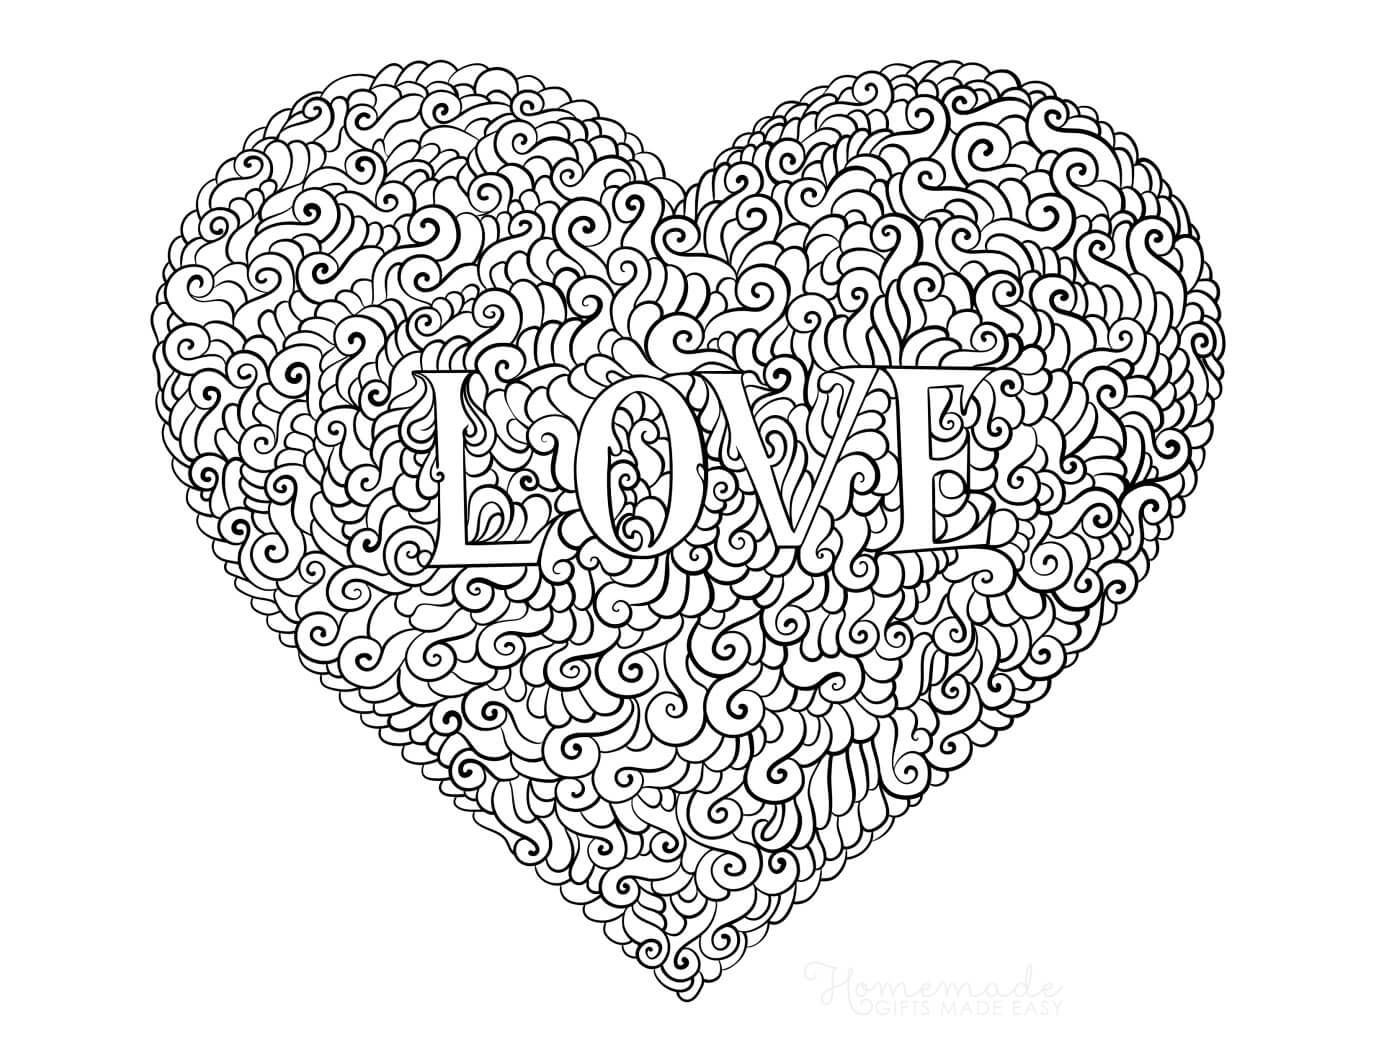 Printable heart coloring pages for adults